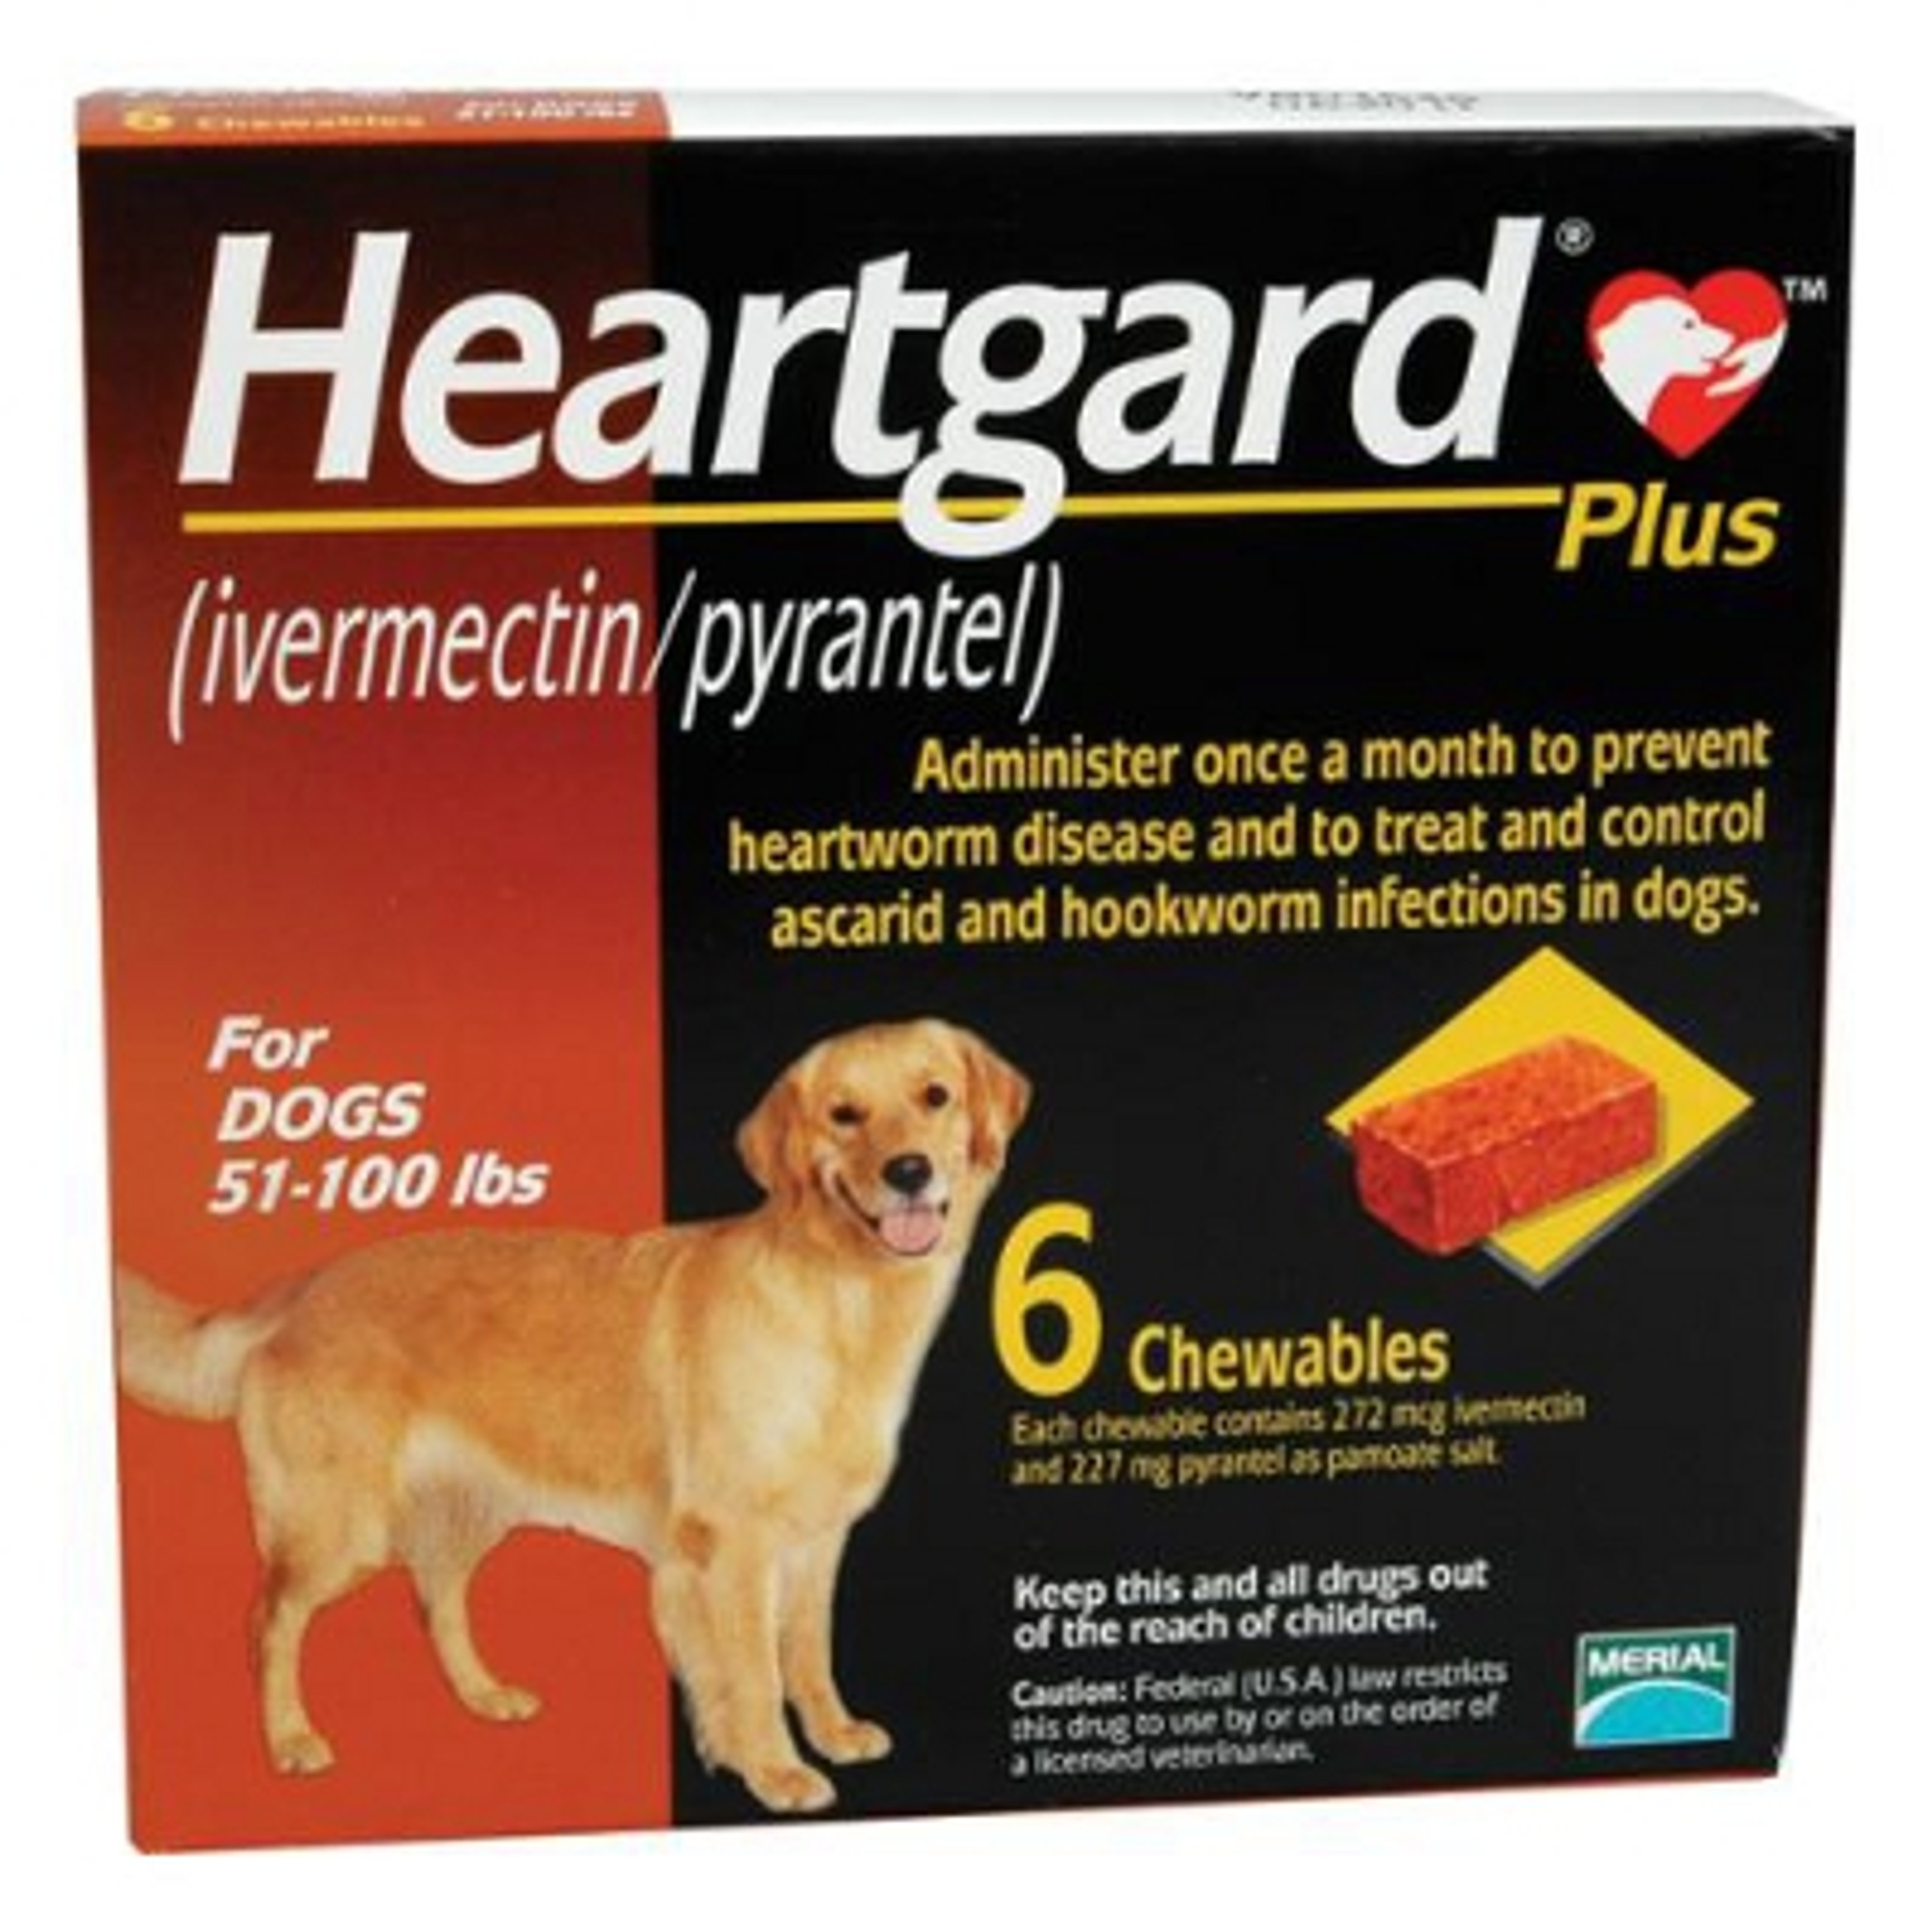 heartgard-plus-chewables-for-dogs-51-100-lbs-23-45-kg-brown-6-chews